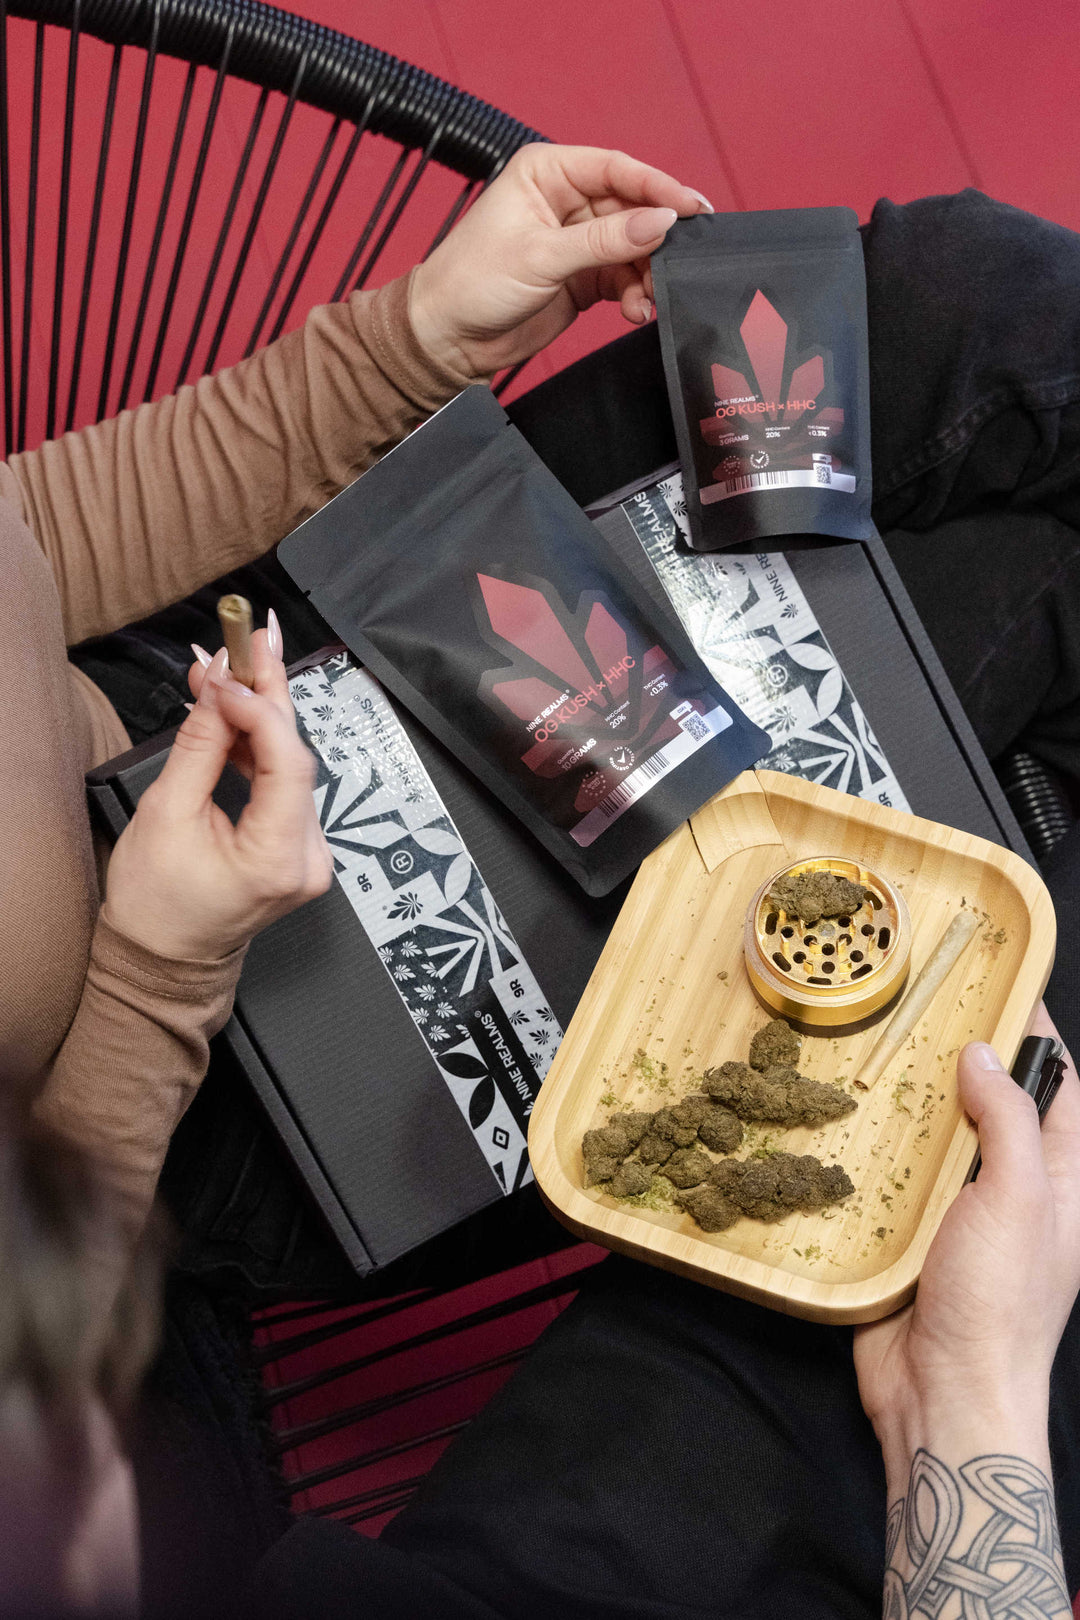 Female holding weed joint doypack with cannabis flower in the rolling tray